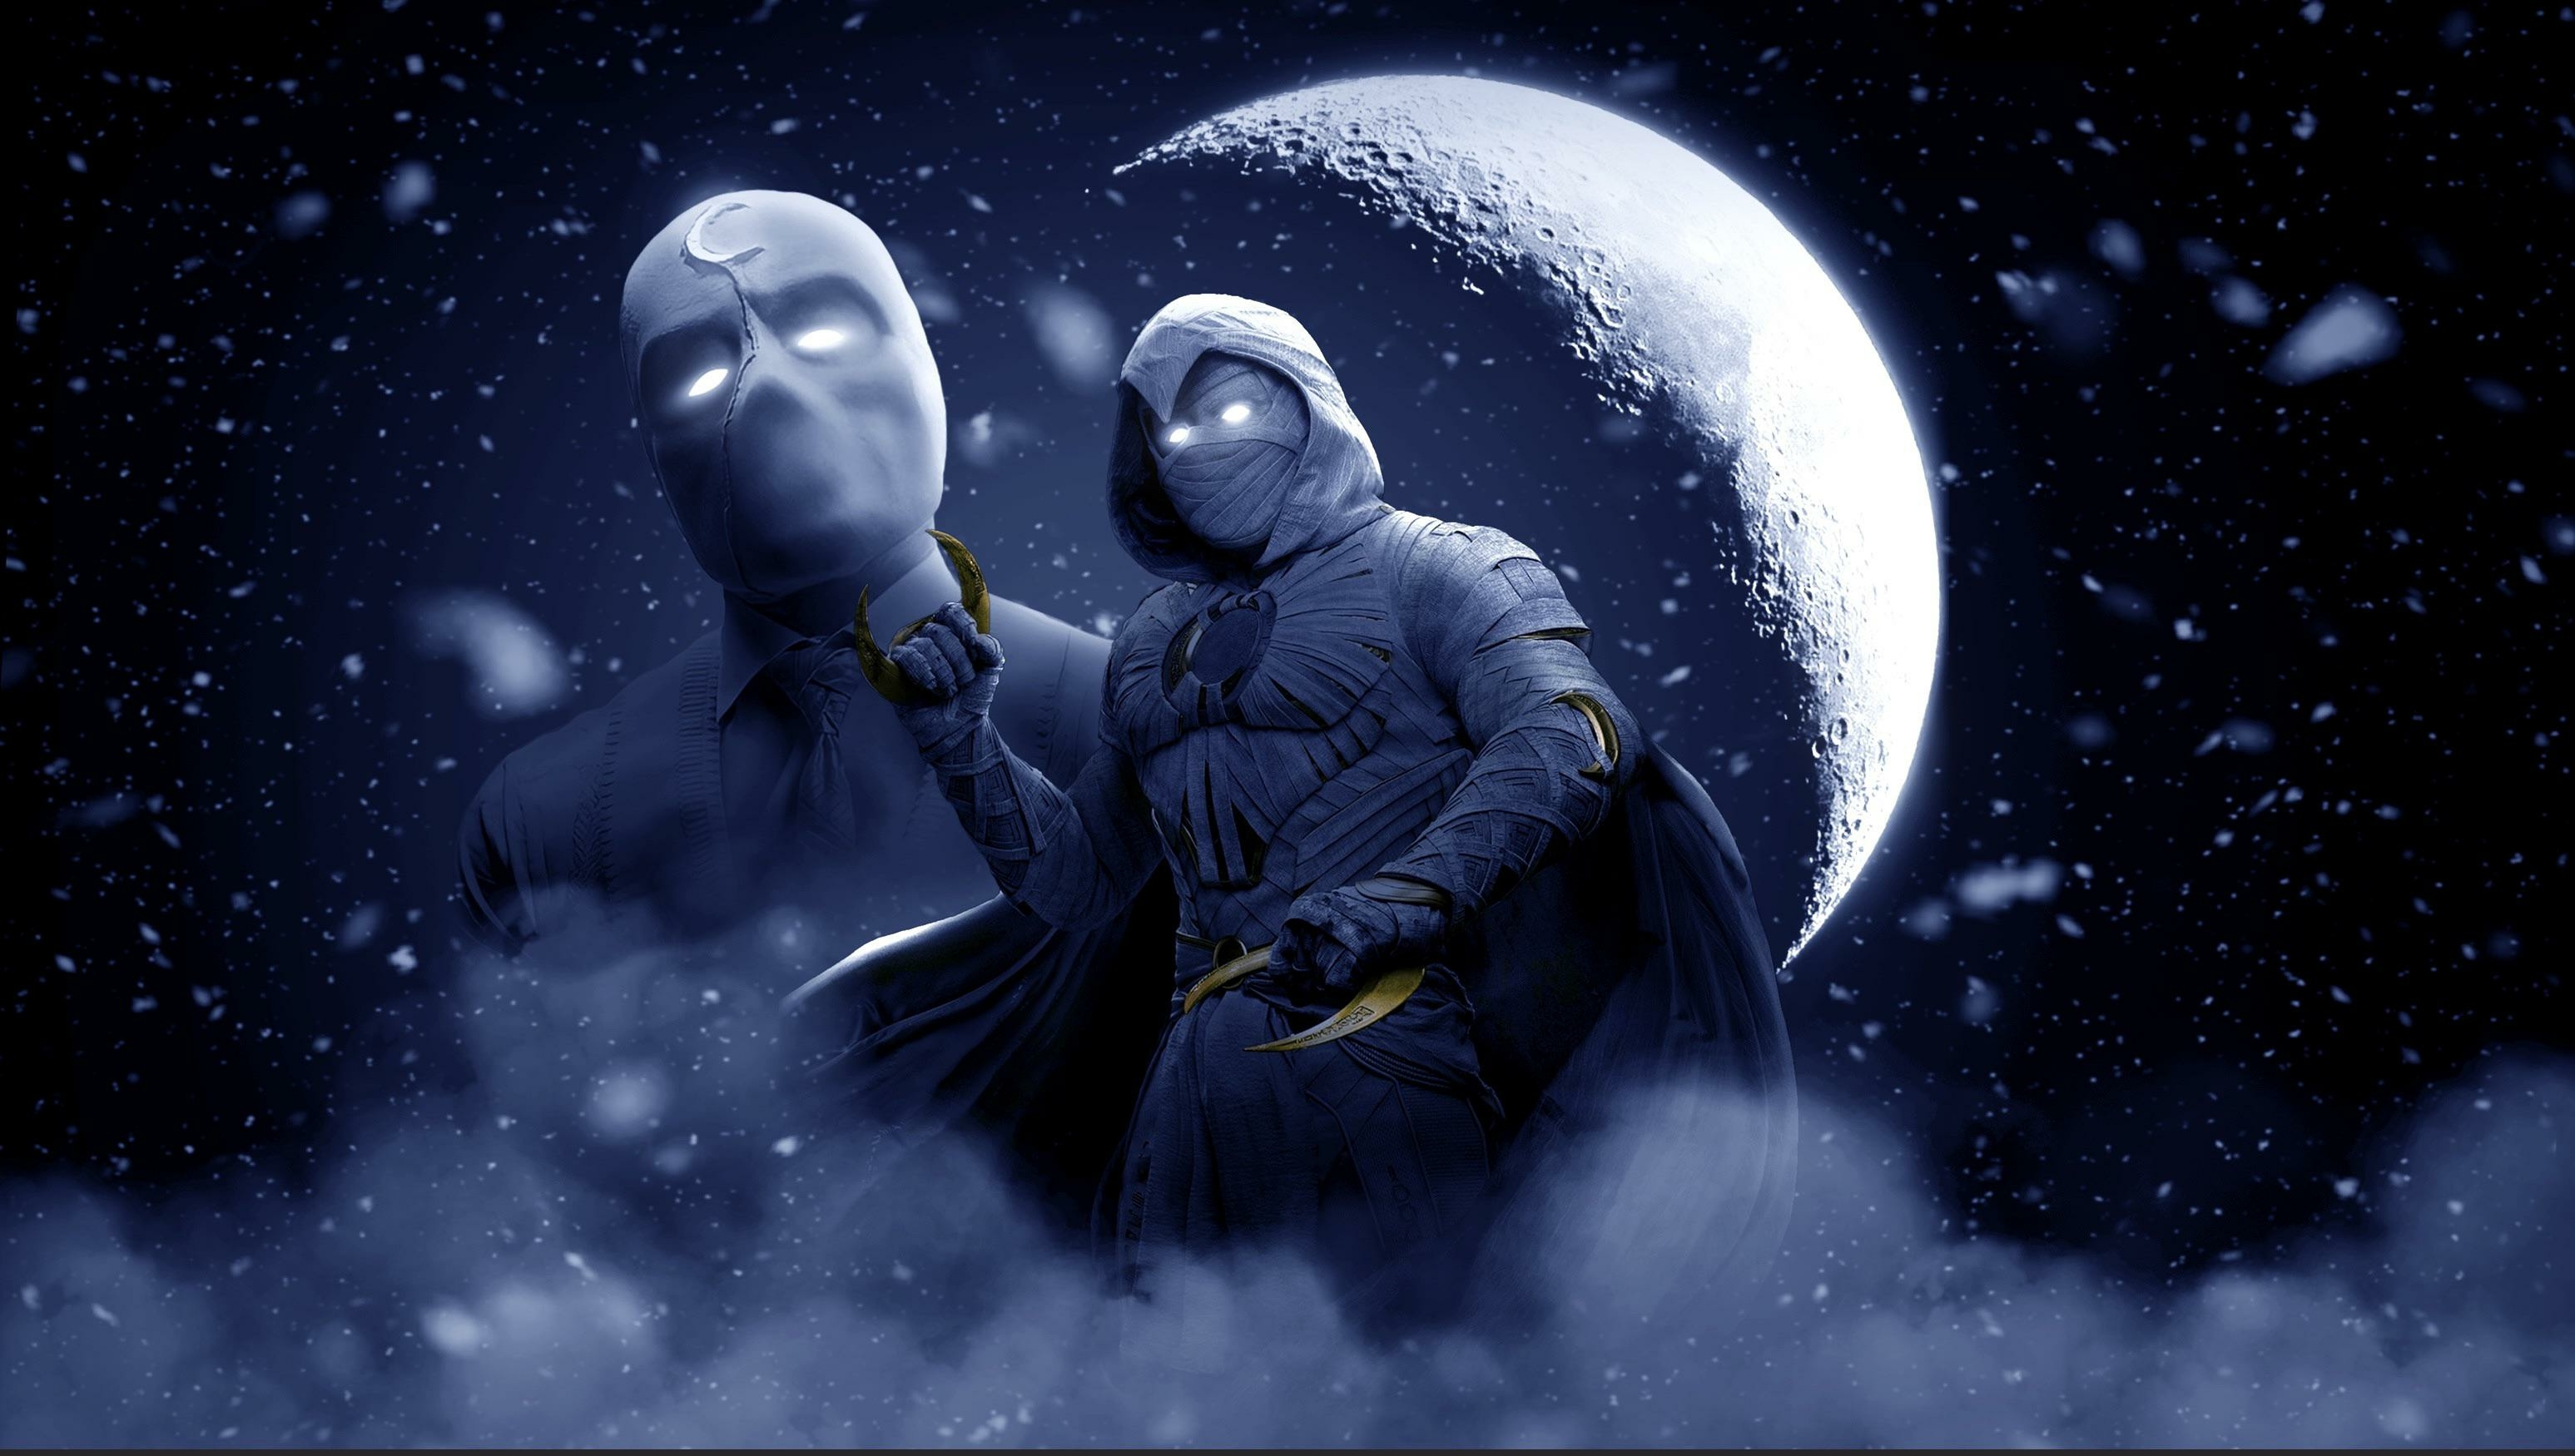 Moon Knight Cool Marvel Superhero Wallpaper, HD TV Series 4K Wallpapers,  Images, Photos and Background - Wallpapers Den